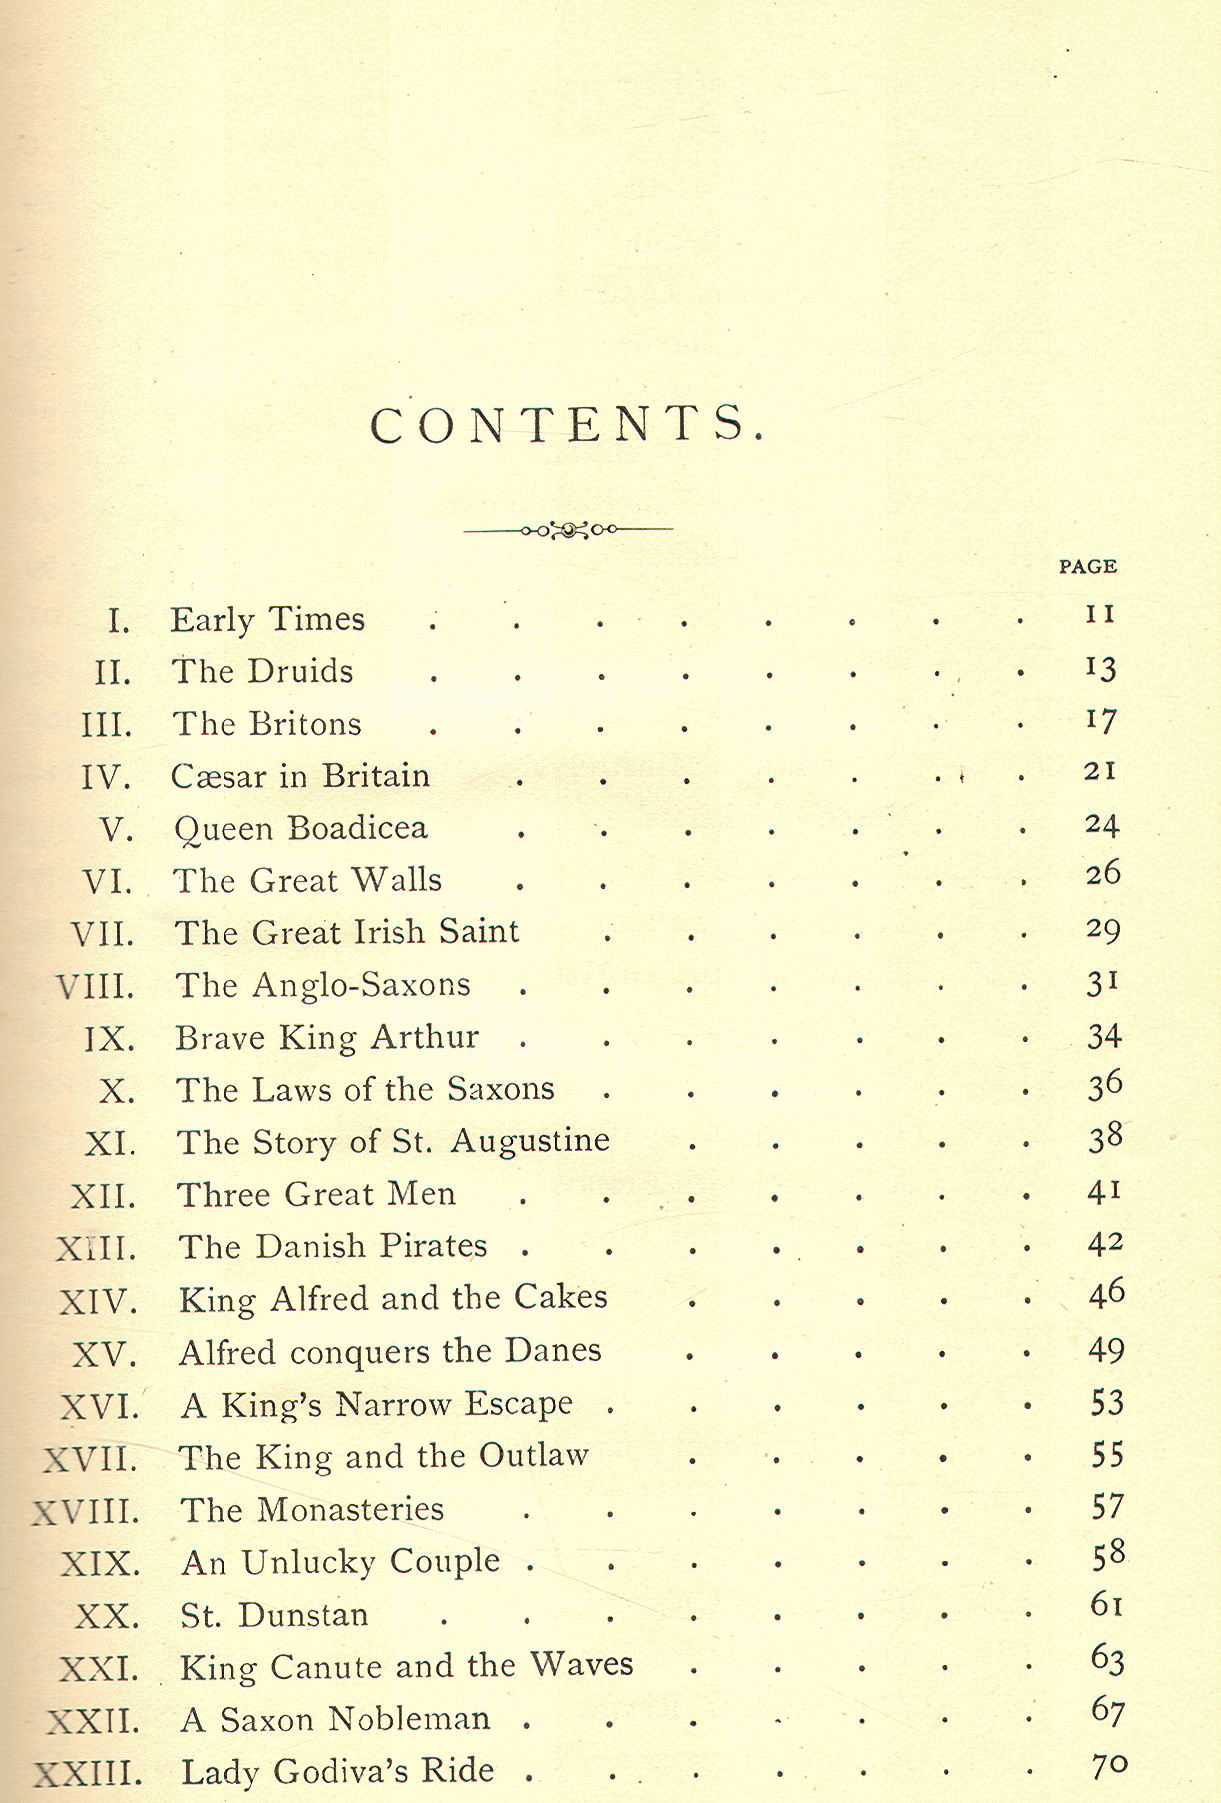 [Contents, page 1 of 4] from The Story of the English by Helene Guerber